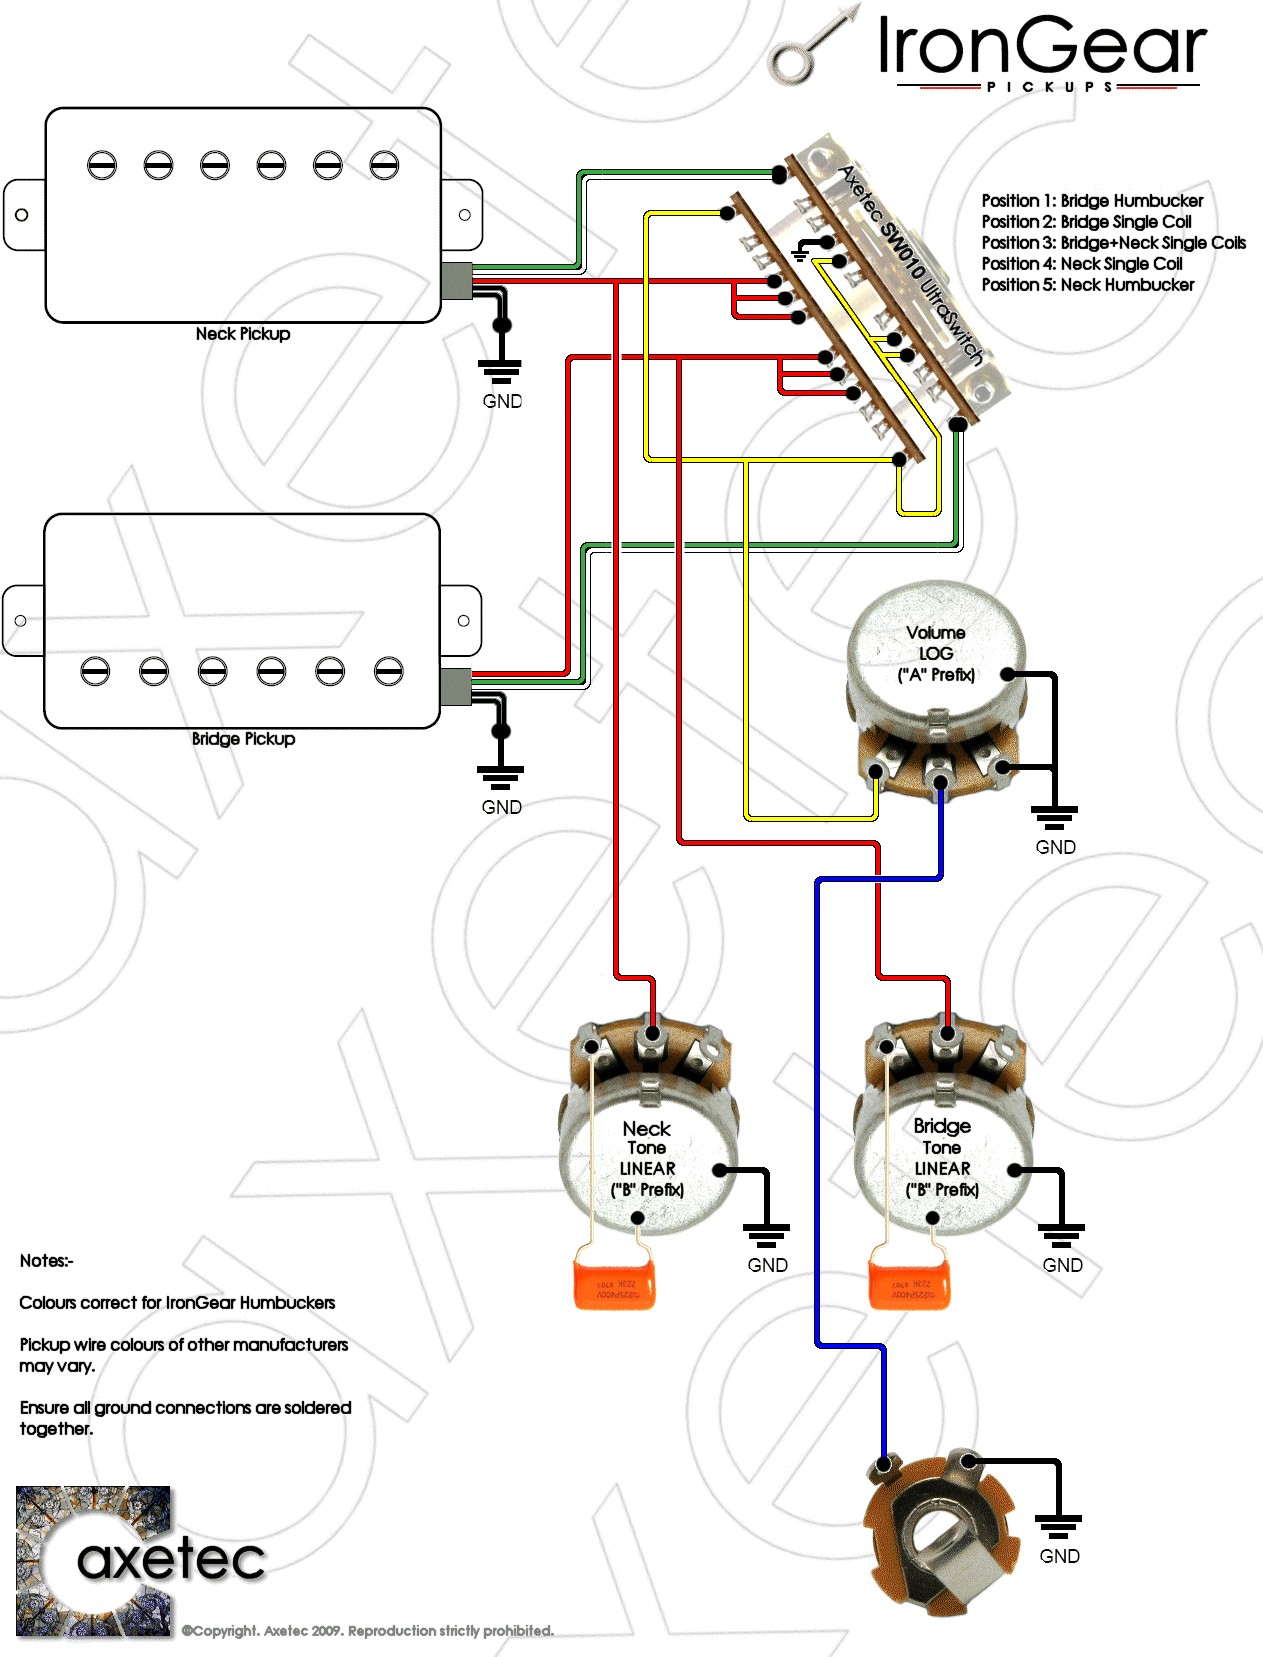 Wire Diagram 2 Humbuckers W 1 Volume Tone With 3 Way Toggle Guitar Wiring Diagram Image collections Diagram Design Ideas